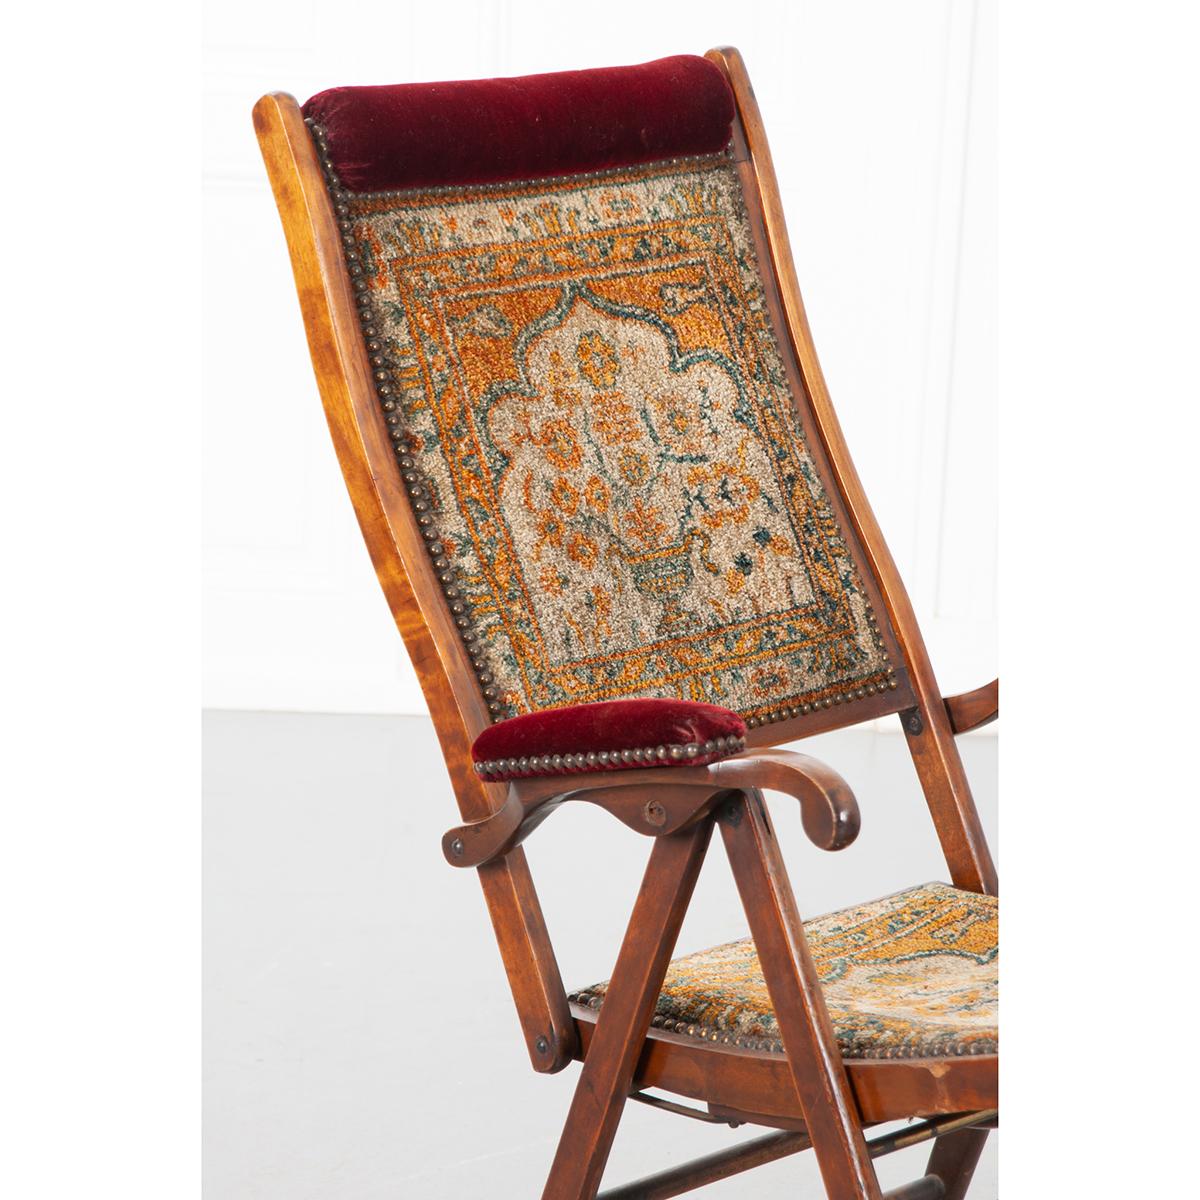 This is an English 19th century tapestry and walnut recliner. It is adjustable and also folds down so it can be easily moved or travel with the owner. It would be a conversation piece. Circa 1870. Be sure to look at the detailed images. 
Folded: